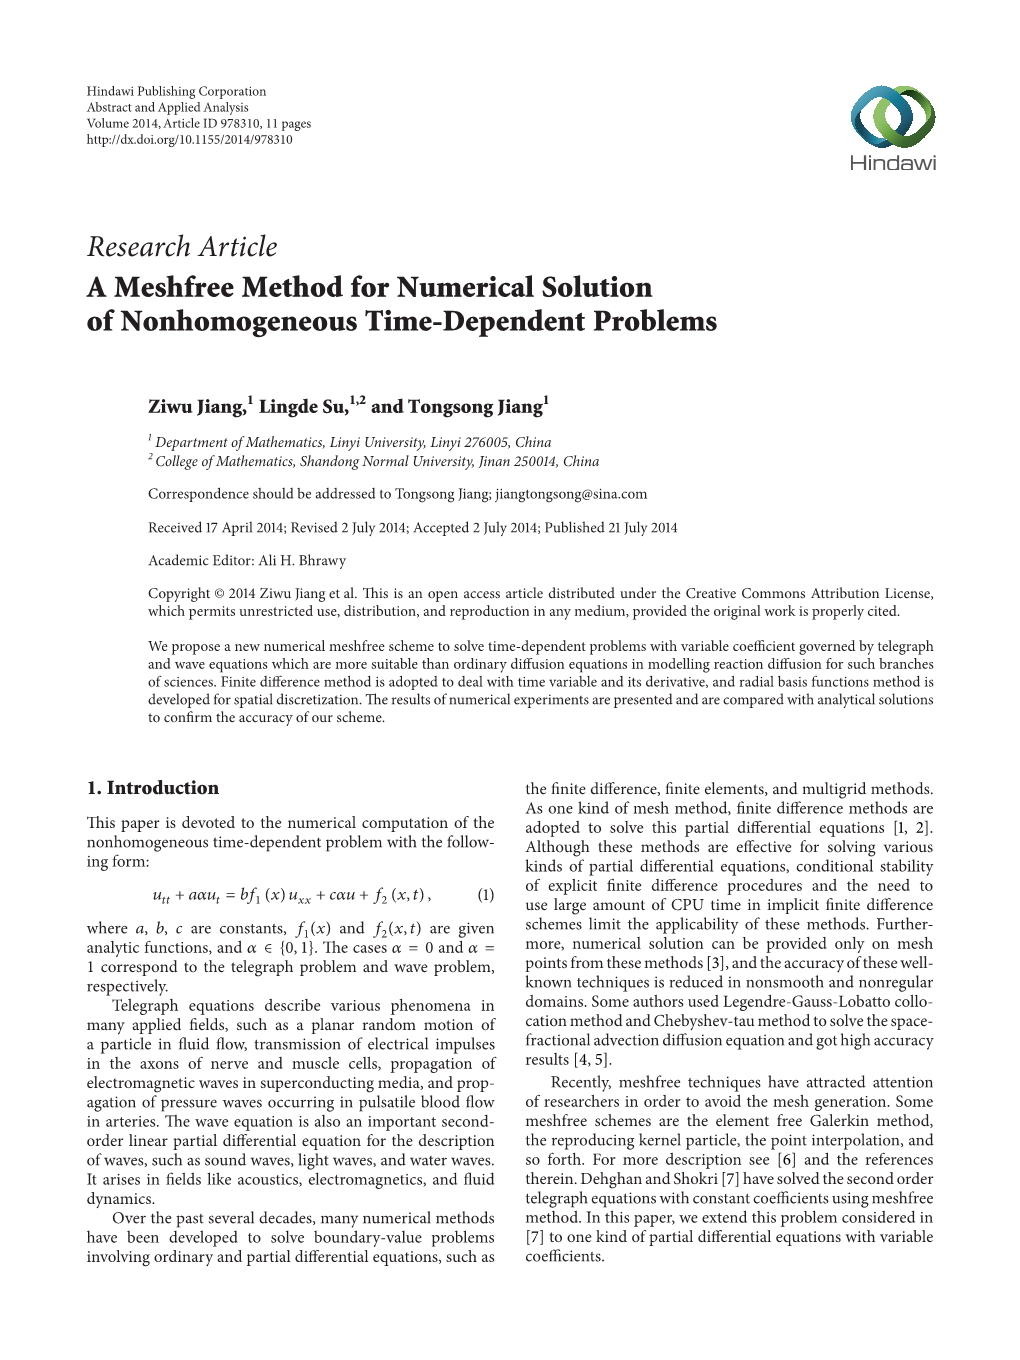 Research Article a Meshfree Method for Numerical Solution of Nonhomogeneous Time-Dependent Problems